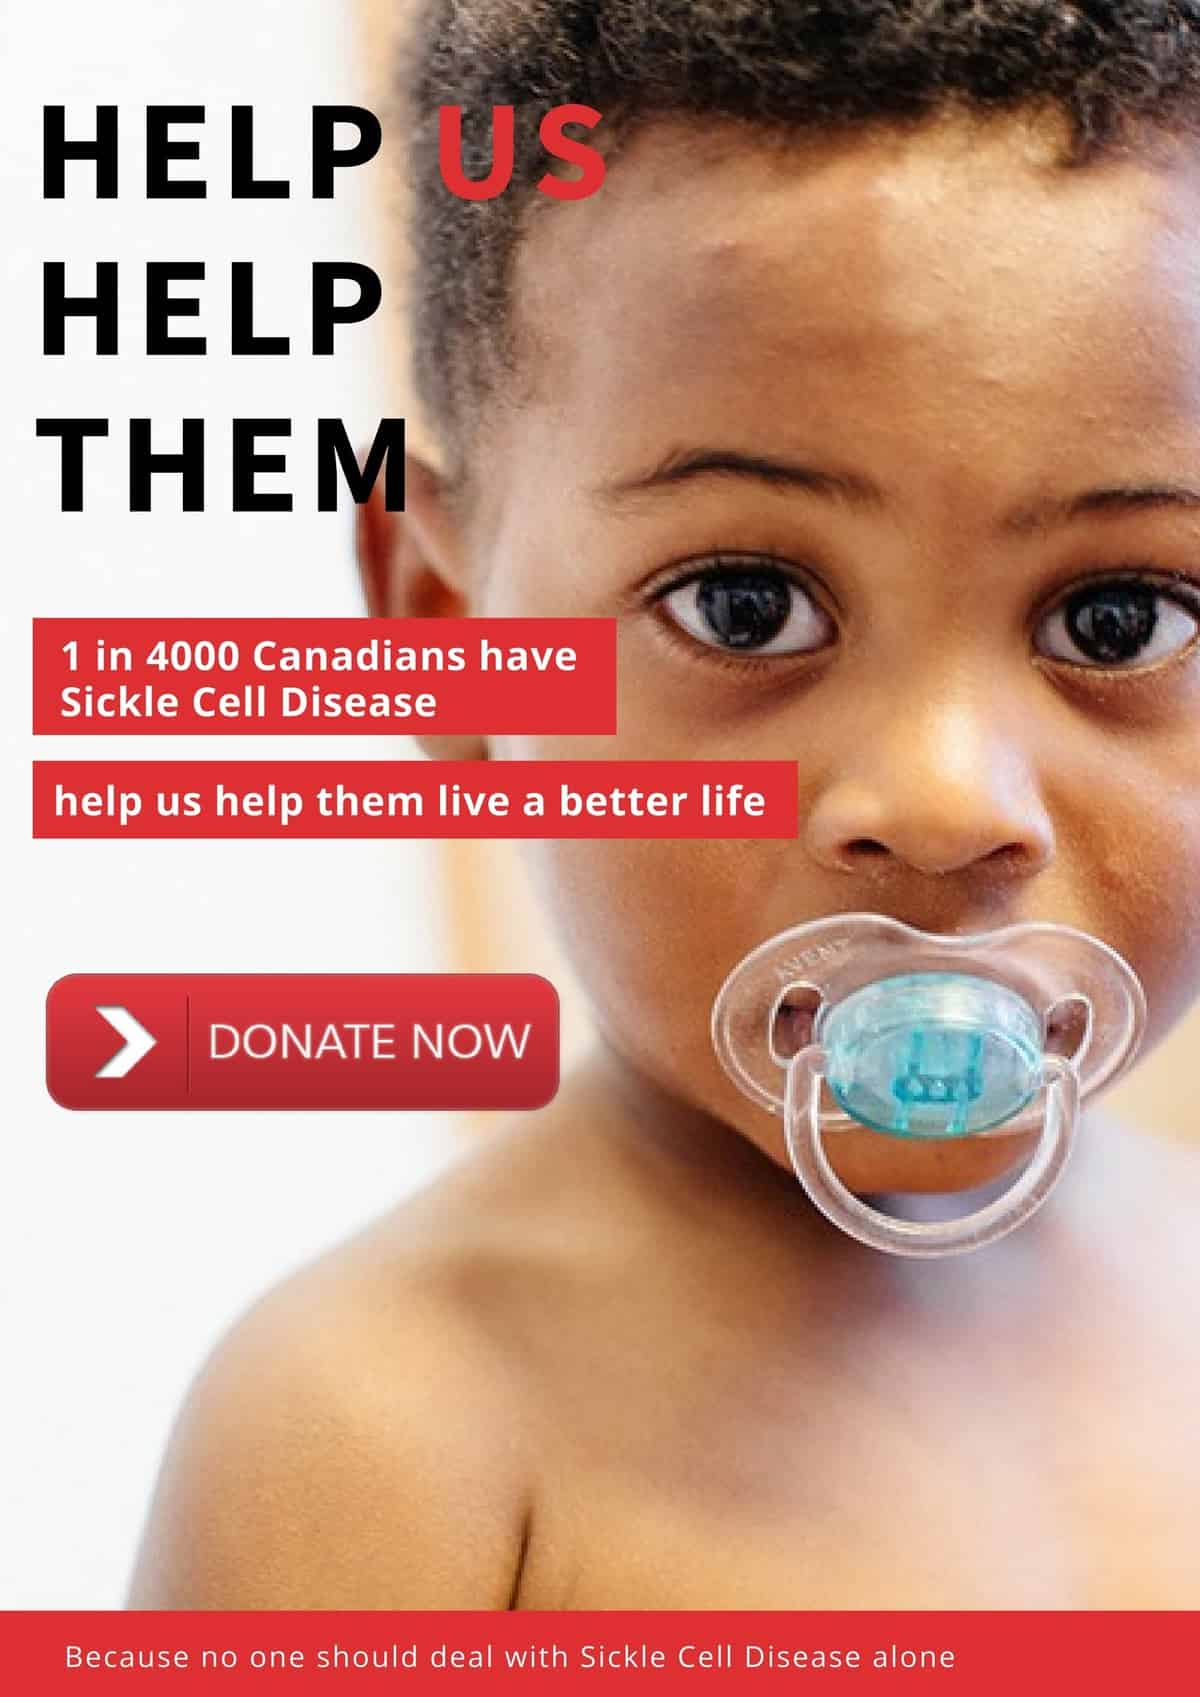 Help Us Help Them, Donate Now